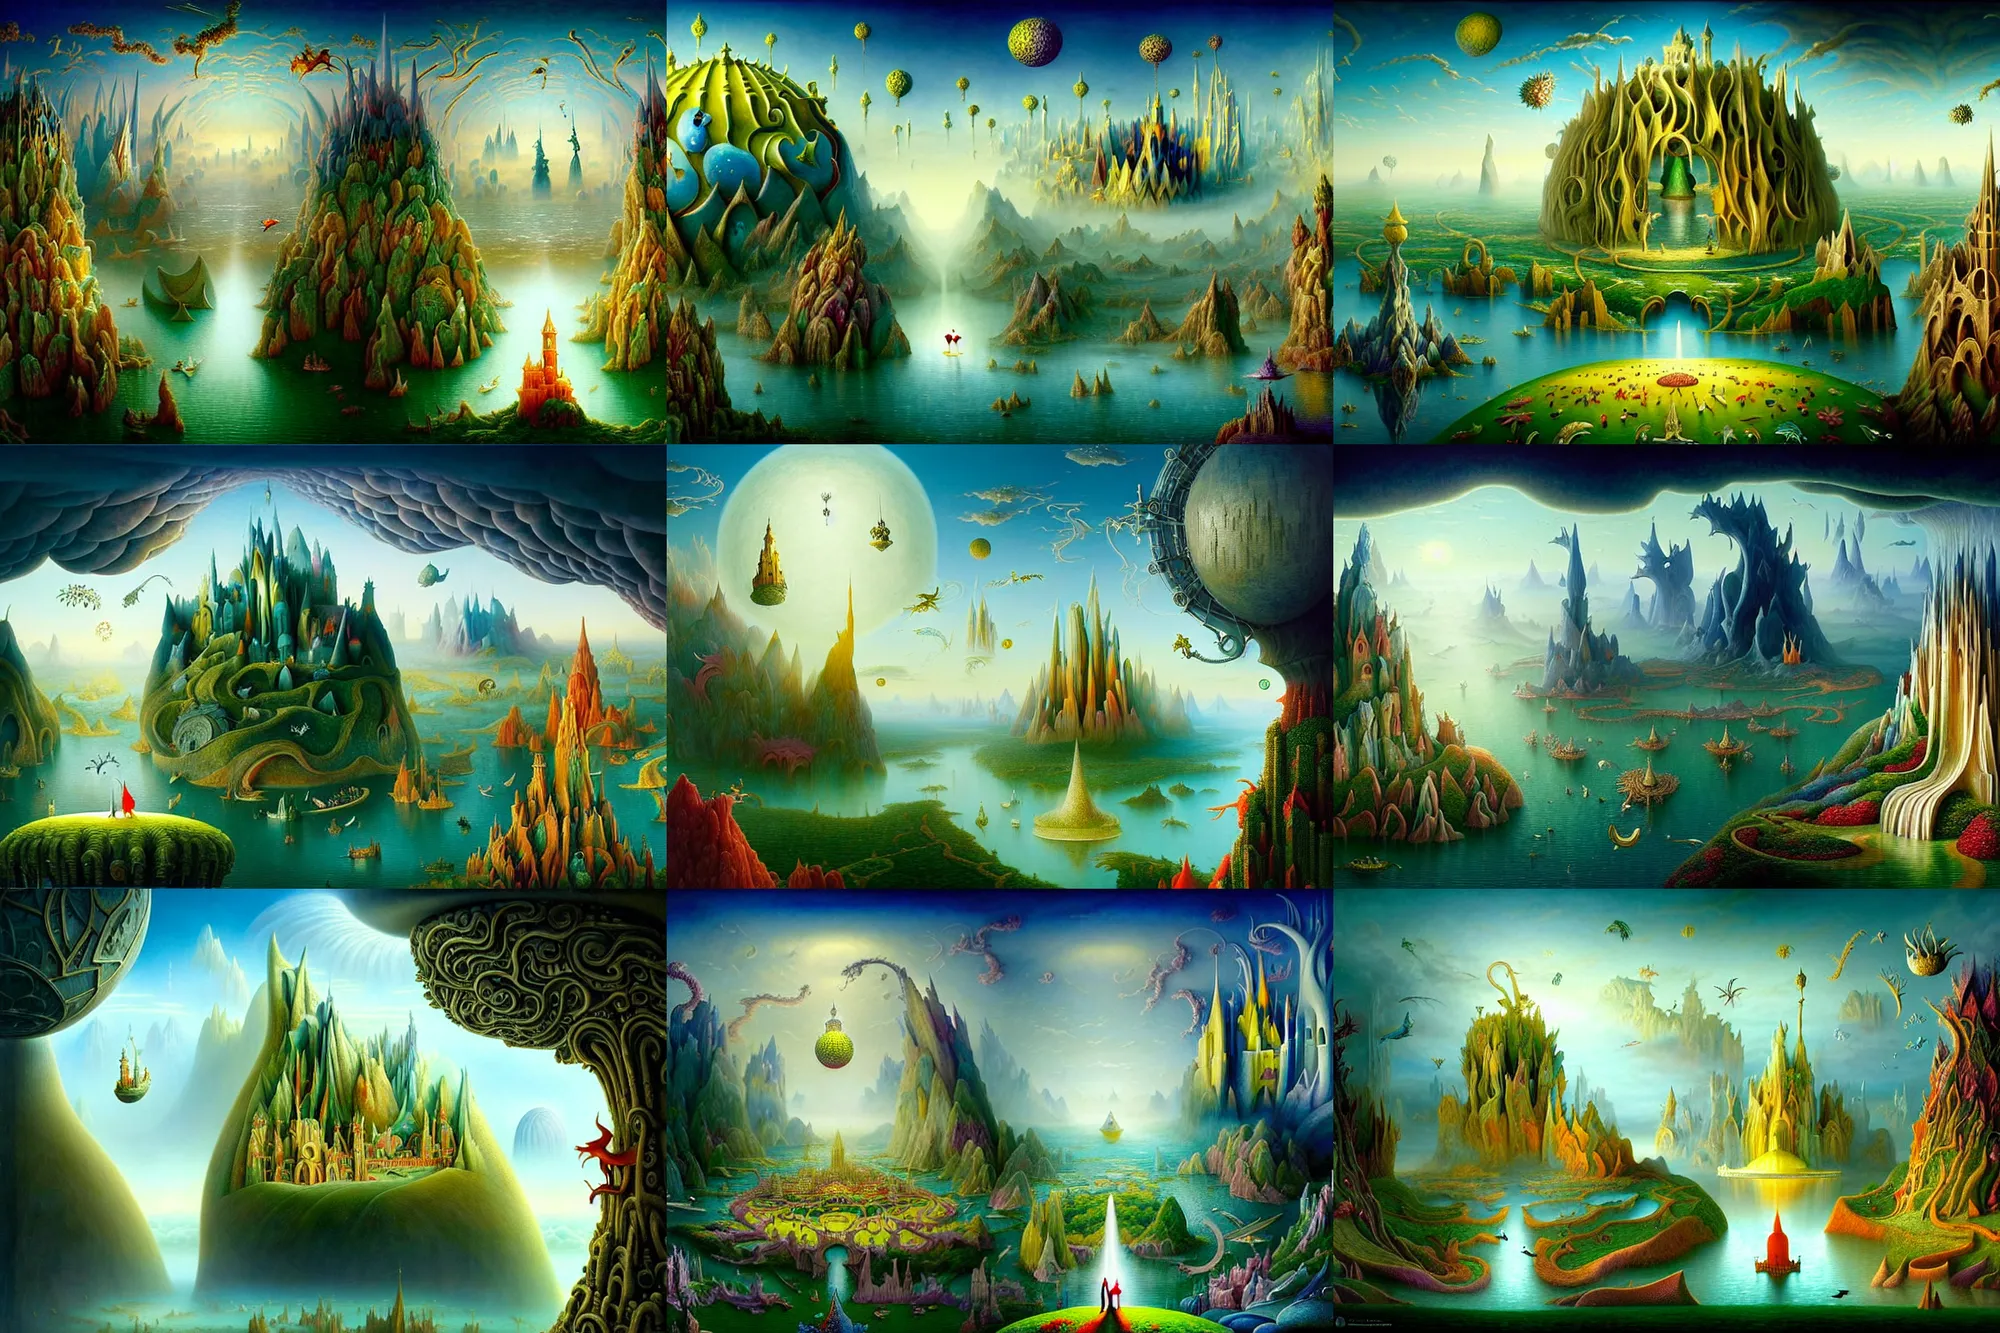 Prompt: a beguiling epic stunning beautiful and insanely detailed matte painting of windows into dream worlds with surreal architecture designed by Heironymous Bosch, dream world populated with mythical whimsical creatures, mega structures inspired by Heironymous Bosch's Garden of Earthly Delights, vast surreal landscape and horizon by Cyril Rolando and Andrew Ferez and Thomas Kinkade, masterpiece!!!, grand!, imaginative!!!, whimsical!!, epic scale, intricate details, sense of awe, elite, wonder, insanely complex, masterful composition!!!, sharp focus, fantasy realism, dramatic lighting